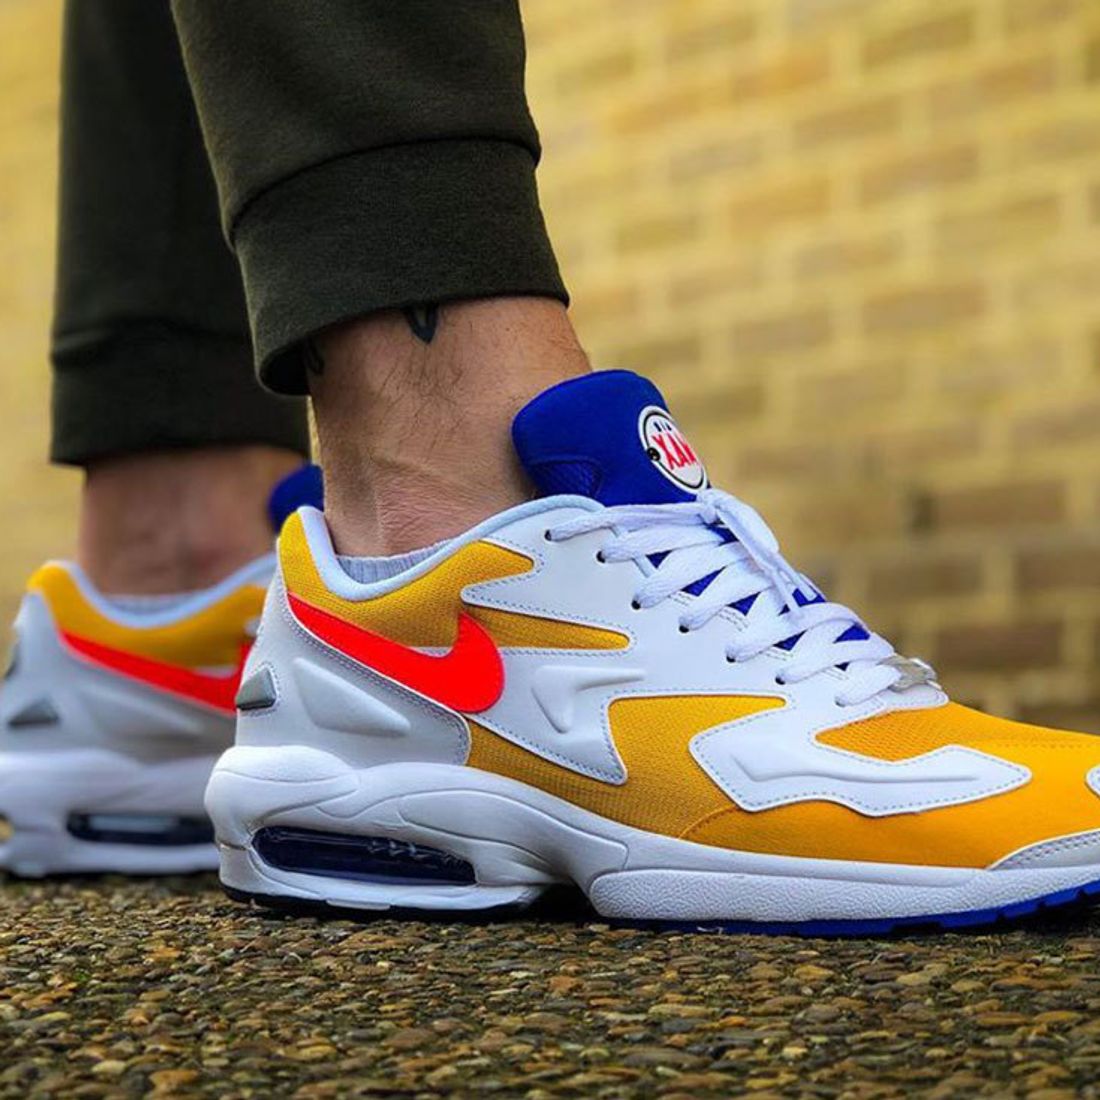 Civic magneet voordelig Here's How People Are Styling Nike's Air Max2 Light 'University Gold' -  Sneaker Freaker